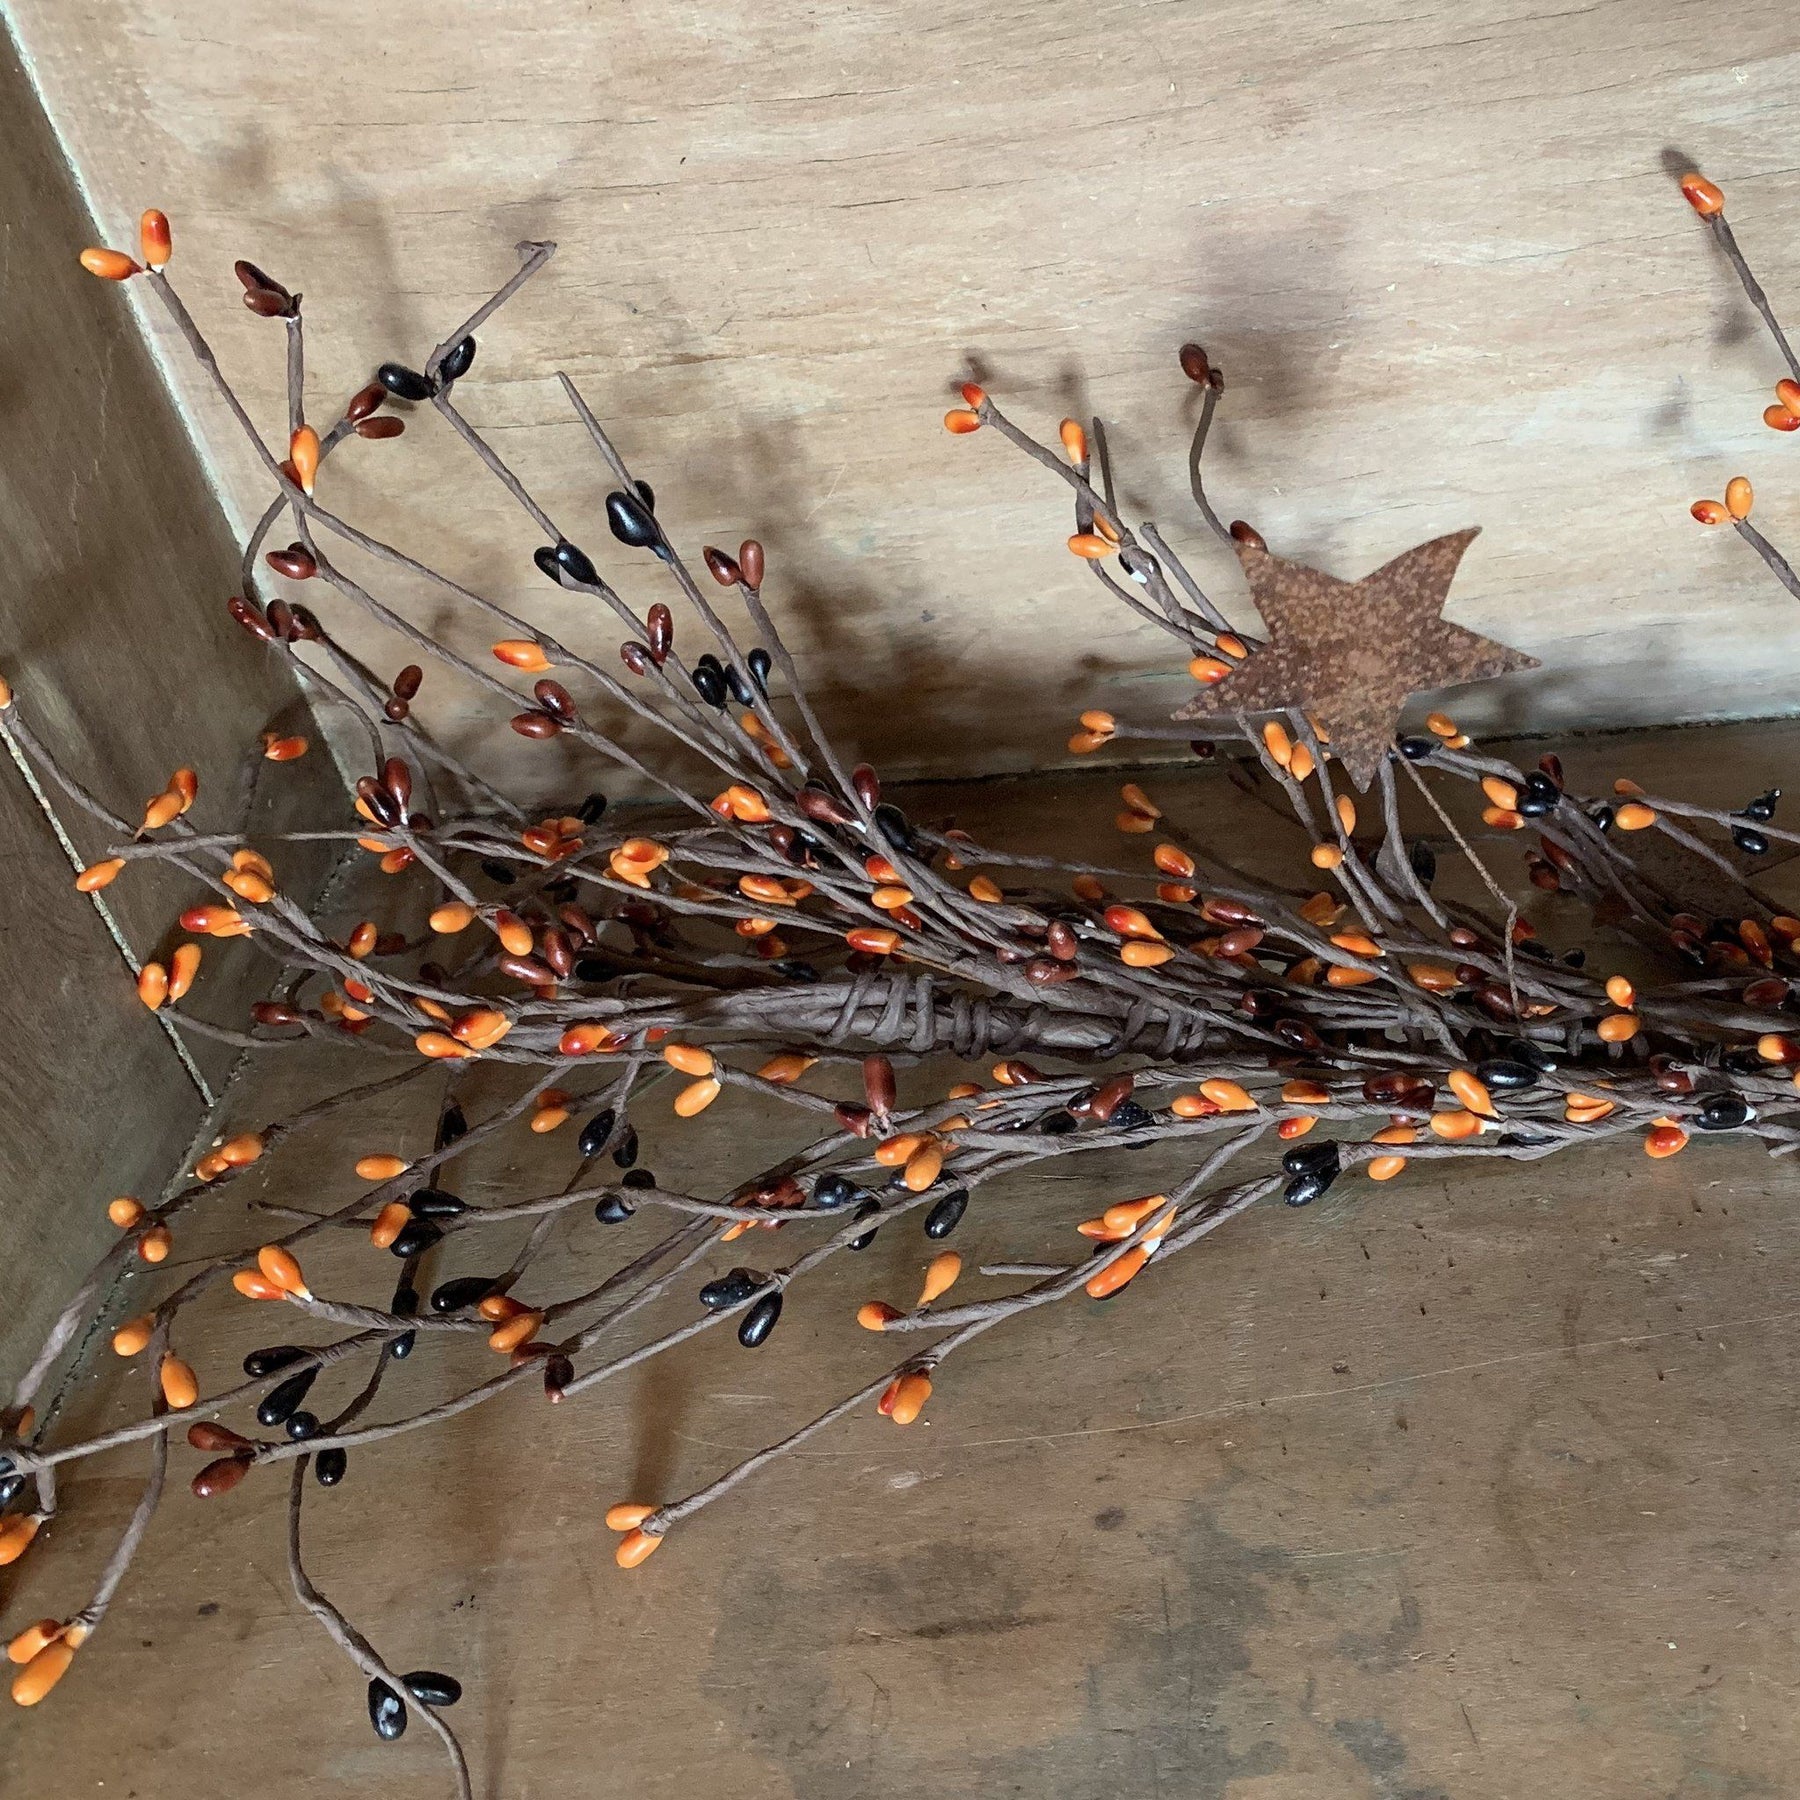 EV-44R Primitive Pip Berry Garland in Orange Color - 5 foot / 60 inches  Length, Fall or All Season Color Garland, Home Décor, Wedding, Fireplace,  Kitchen and Dining Table Décor 